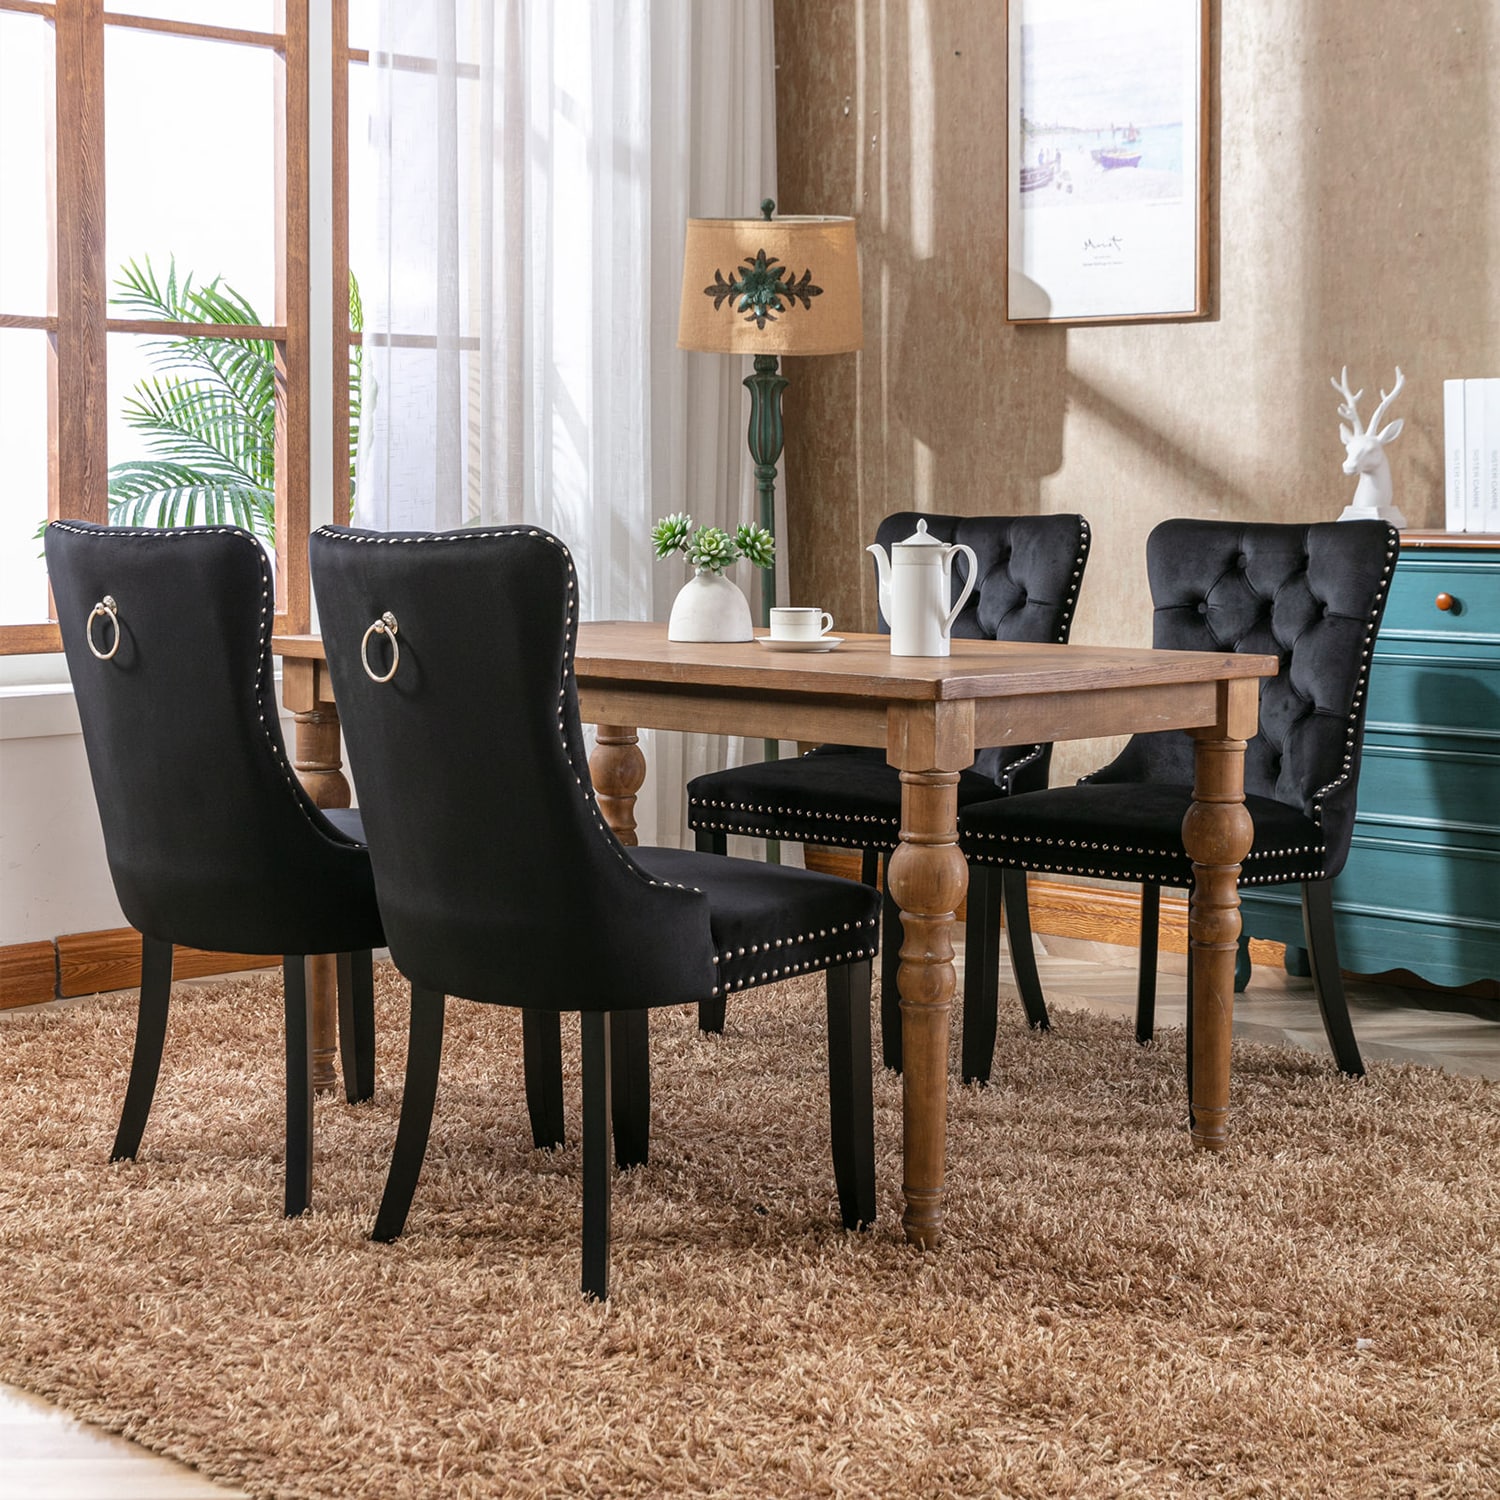 in 2-Pcs Dining Chair department Upholstered Velvet the Upholstered Velvet Chairs Contemporary/Modern at Dining Frame) Dining (Wood Side Chair Set GZMR